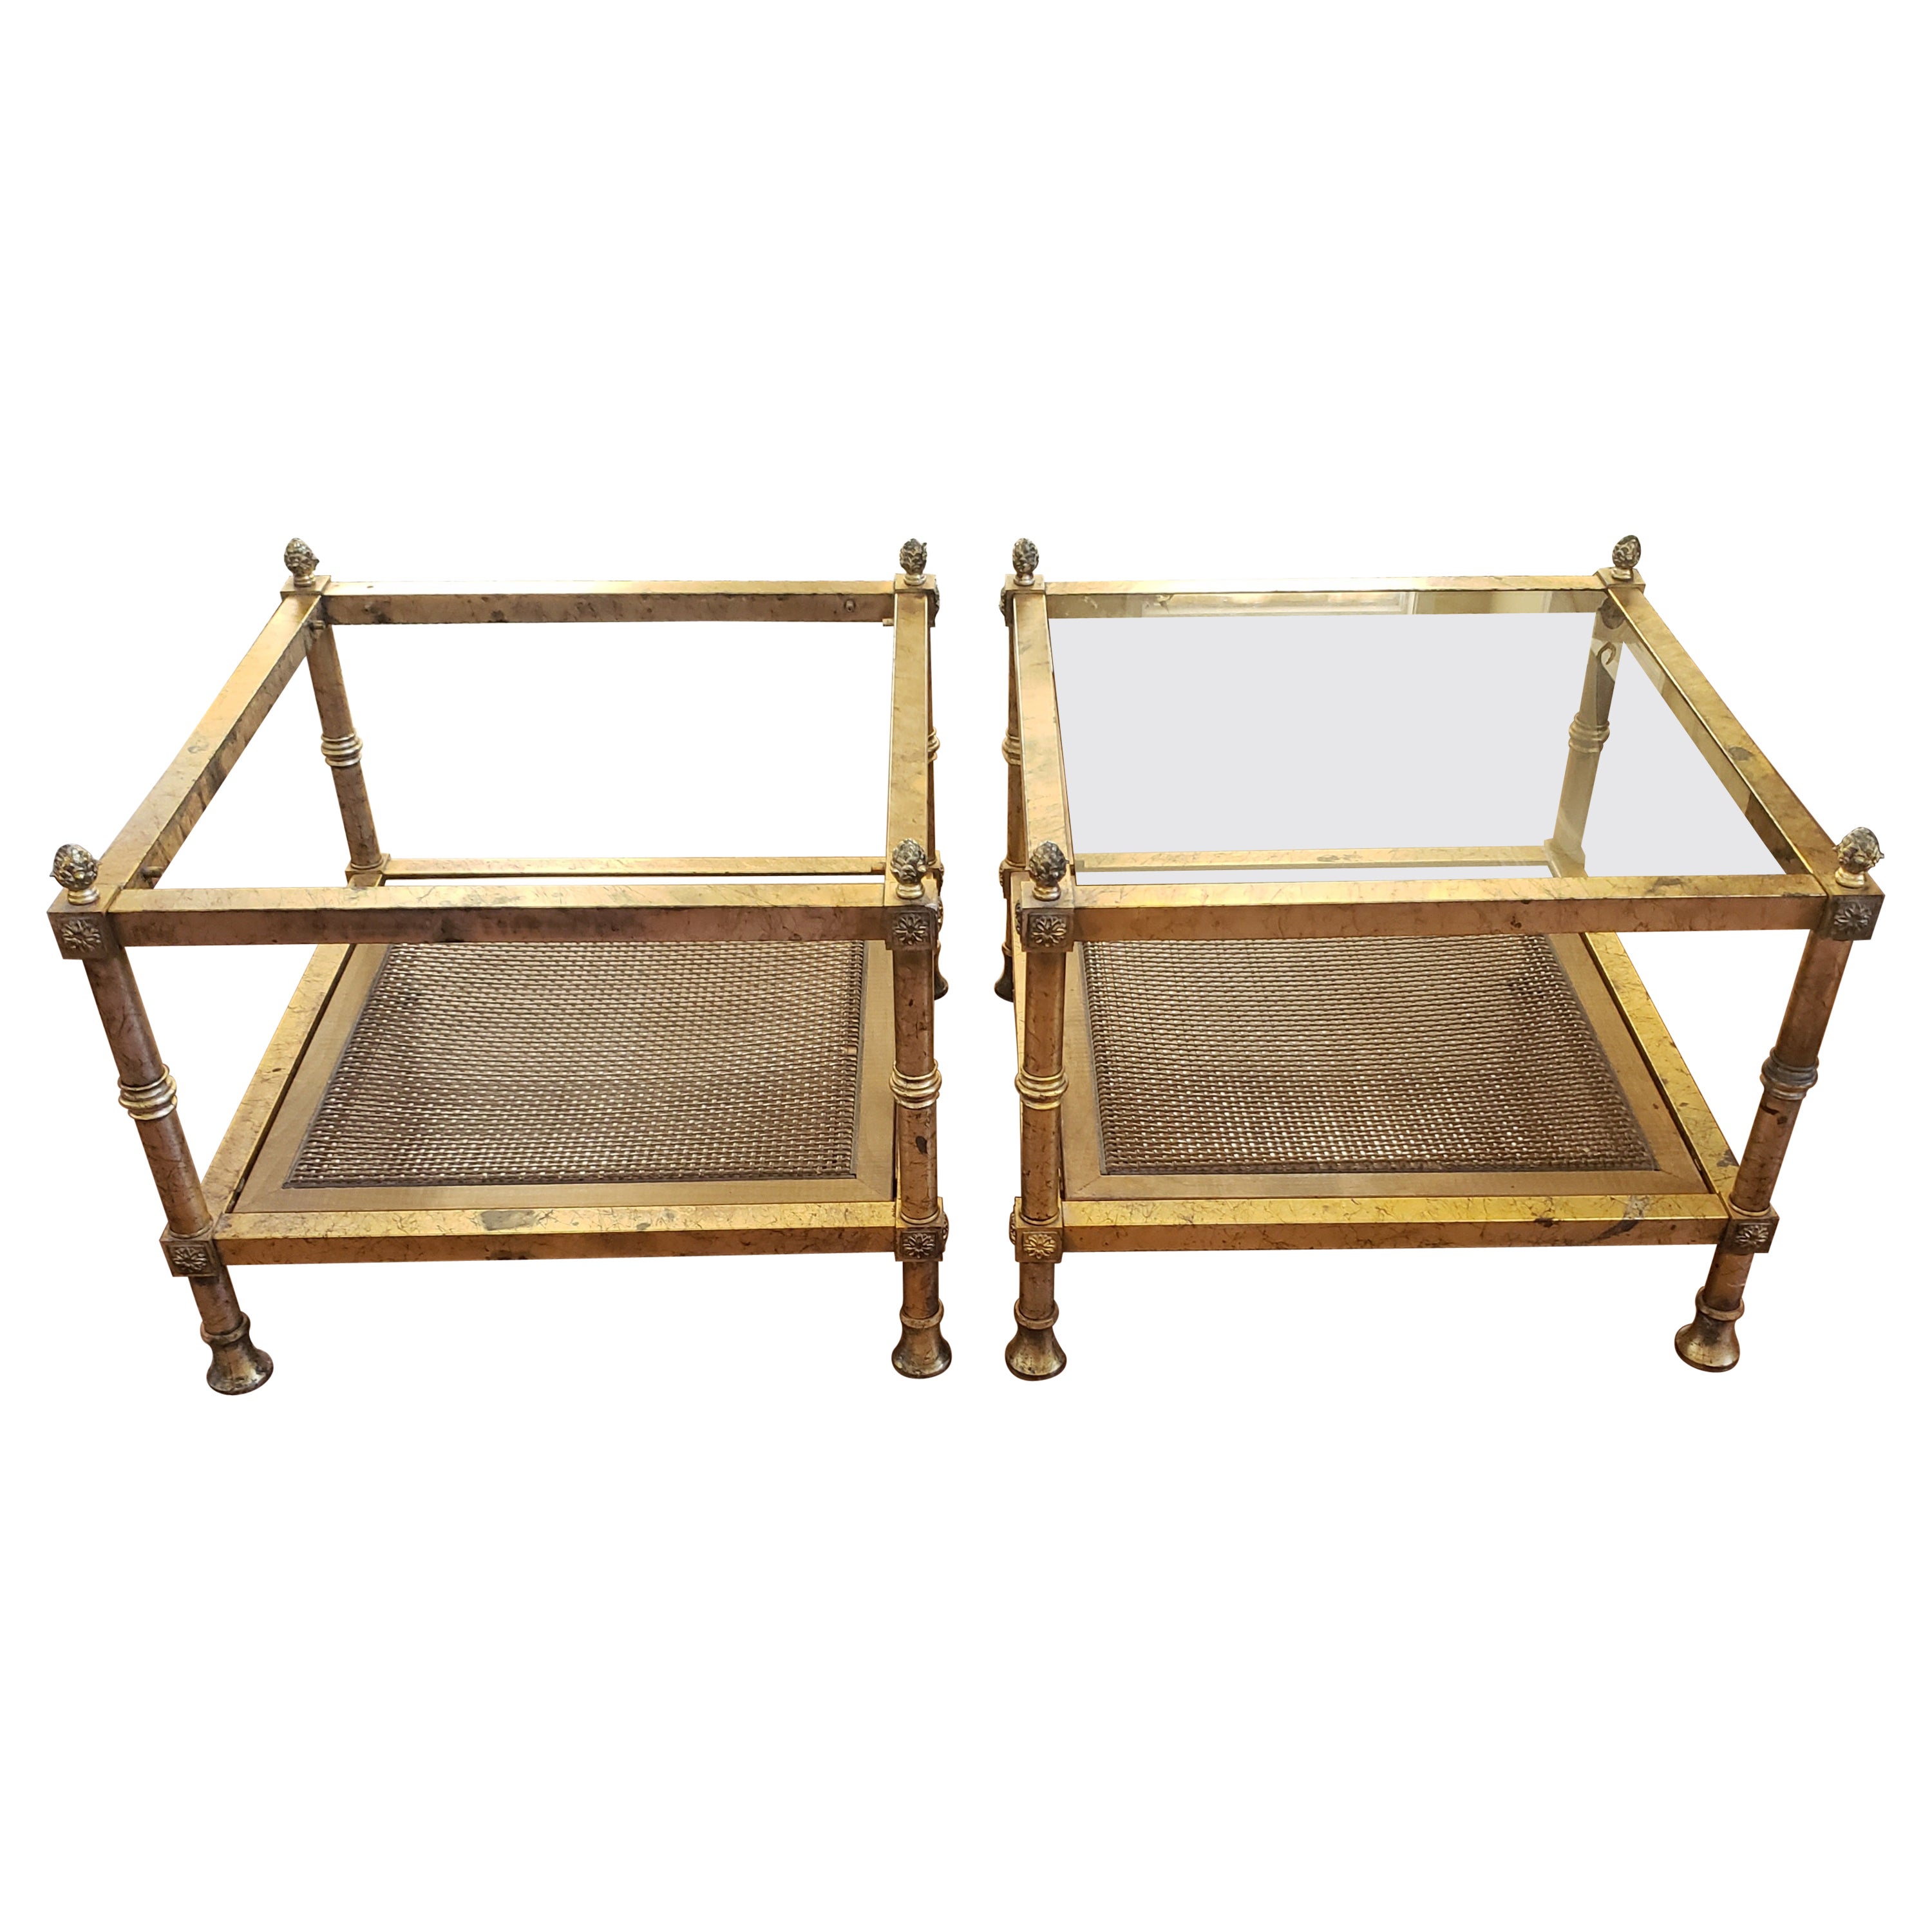 Maison Jansen Neoclassical Gilt Metal Wicker w Glass Inset Top Side Tables, Pair